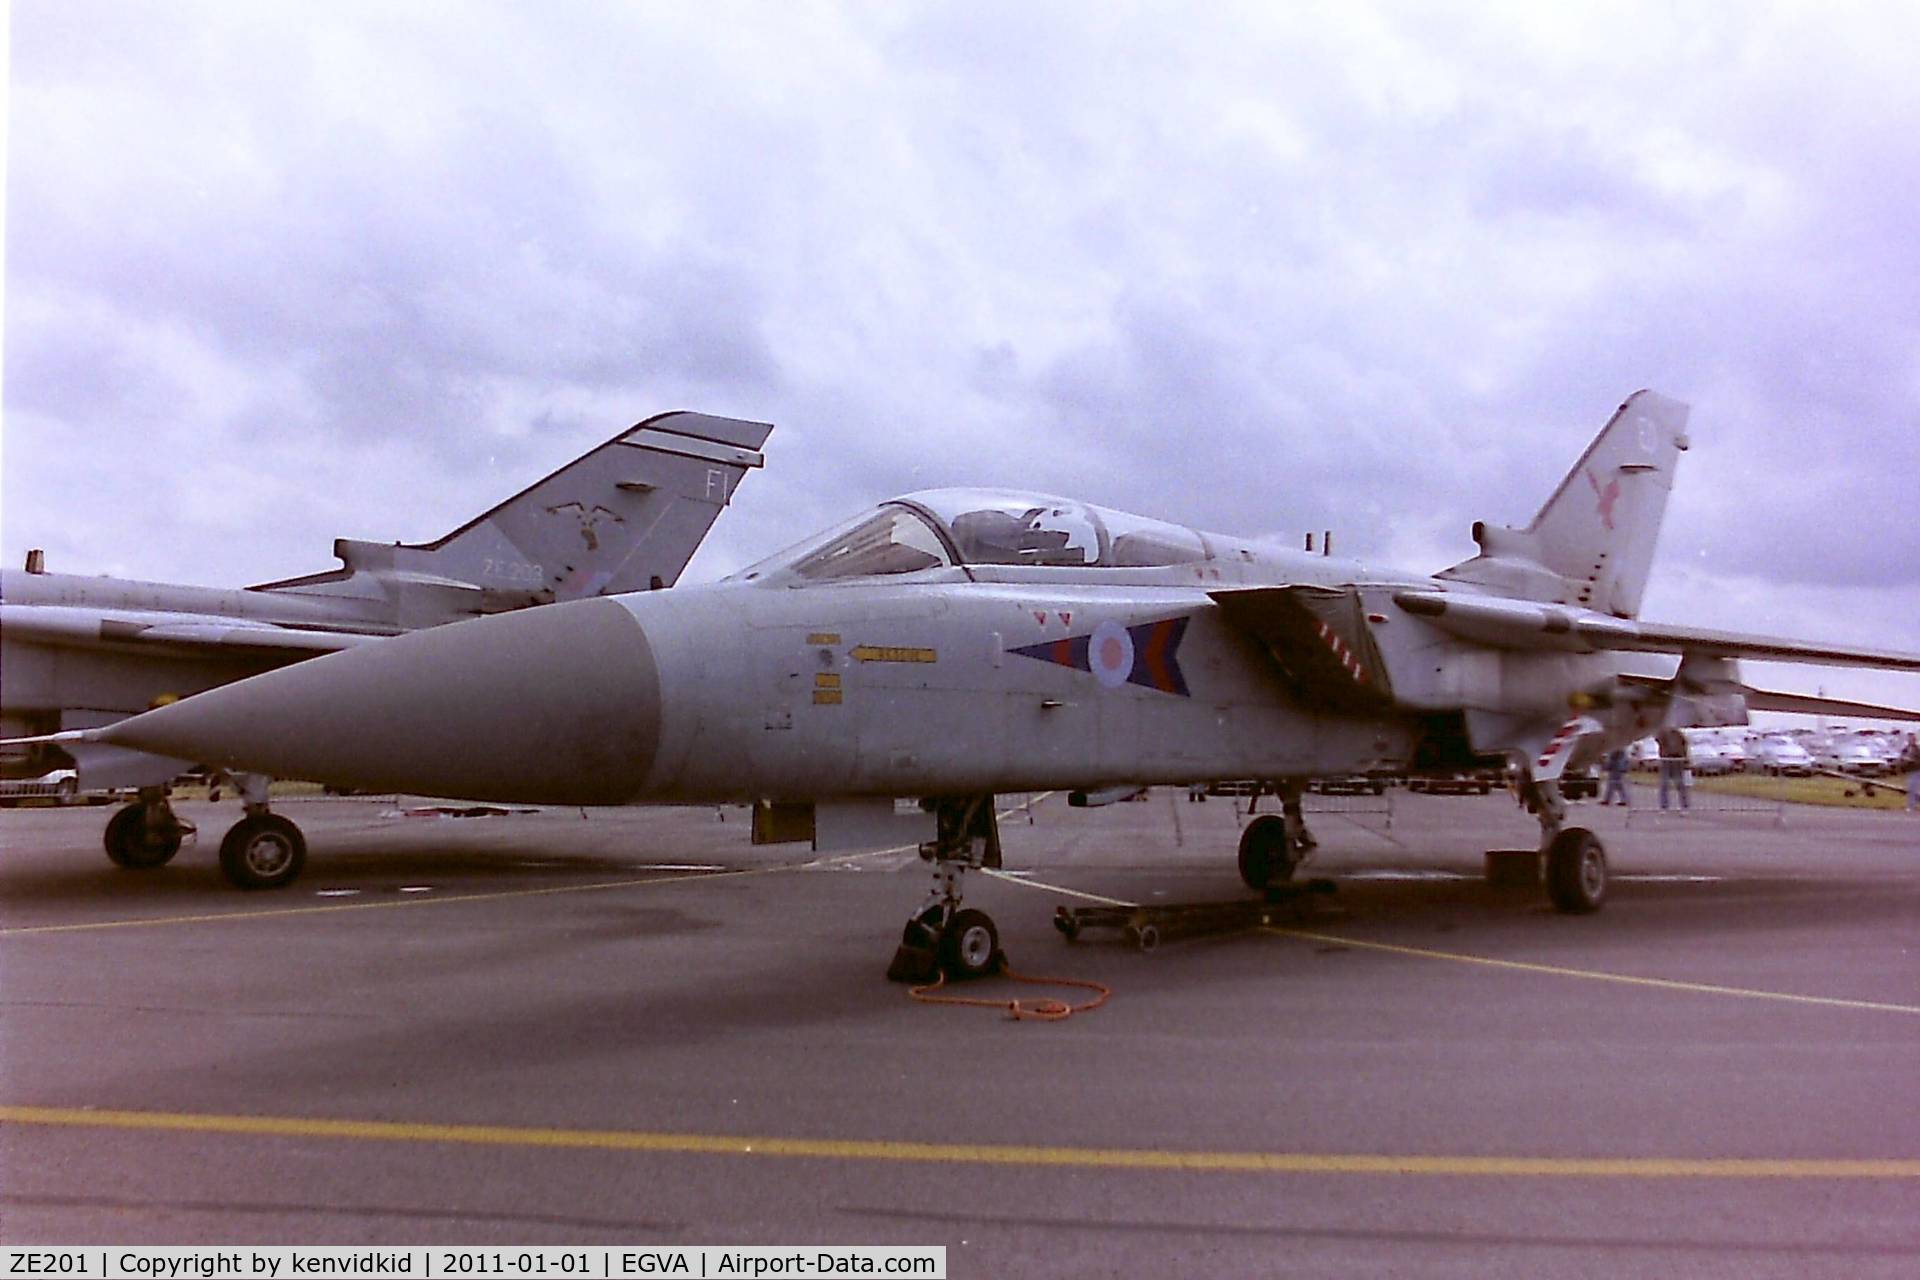 ZE201, 1986 Panavia Tornado F.3 C/N AS022/559/2039, At RIAT 1993, scanned from negative.